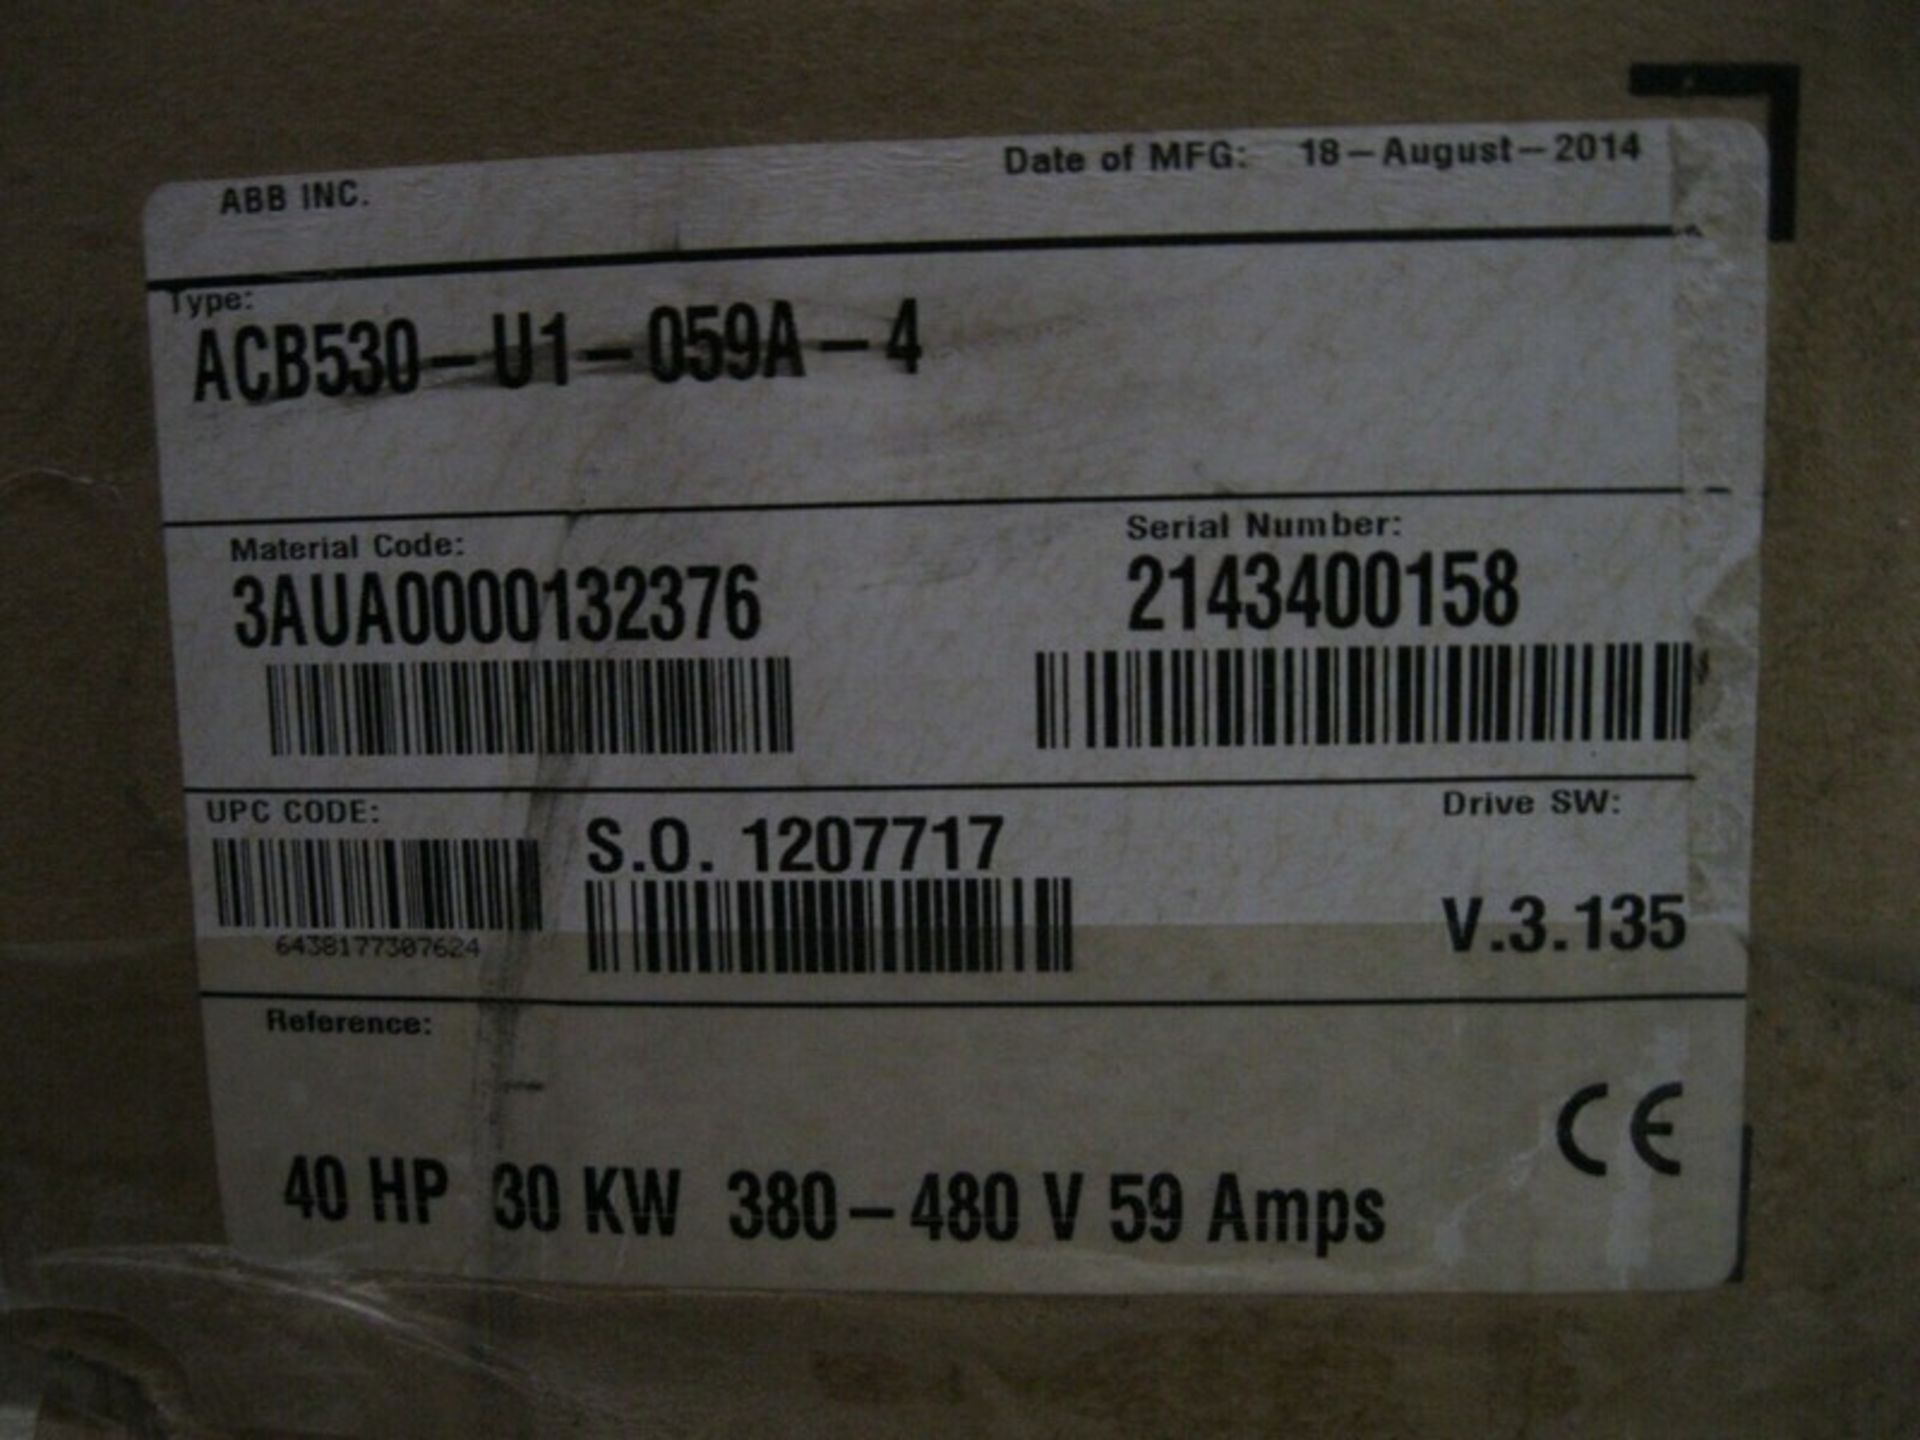 ABB Baldor ACB530-U1-059A-4 Variable Speed Drive 40 HP NEW (Loading Fee $50) (Located Springfield, - Image 5 of 7